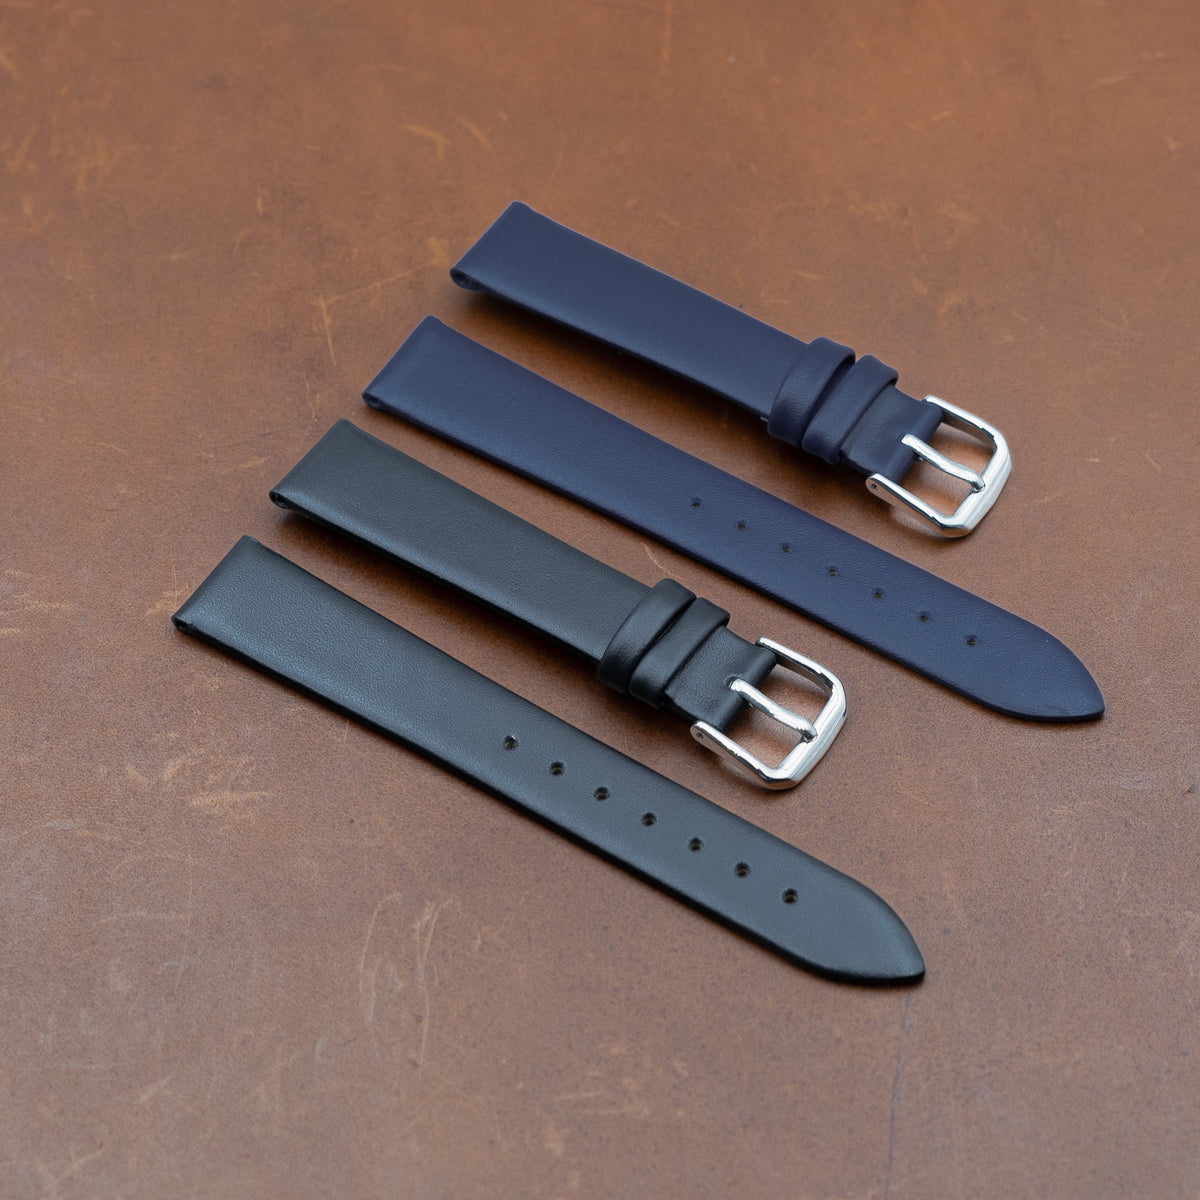 Unstitched Smooth Leather Watch Strap in Black (12mm)